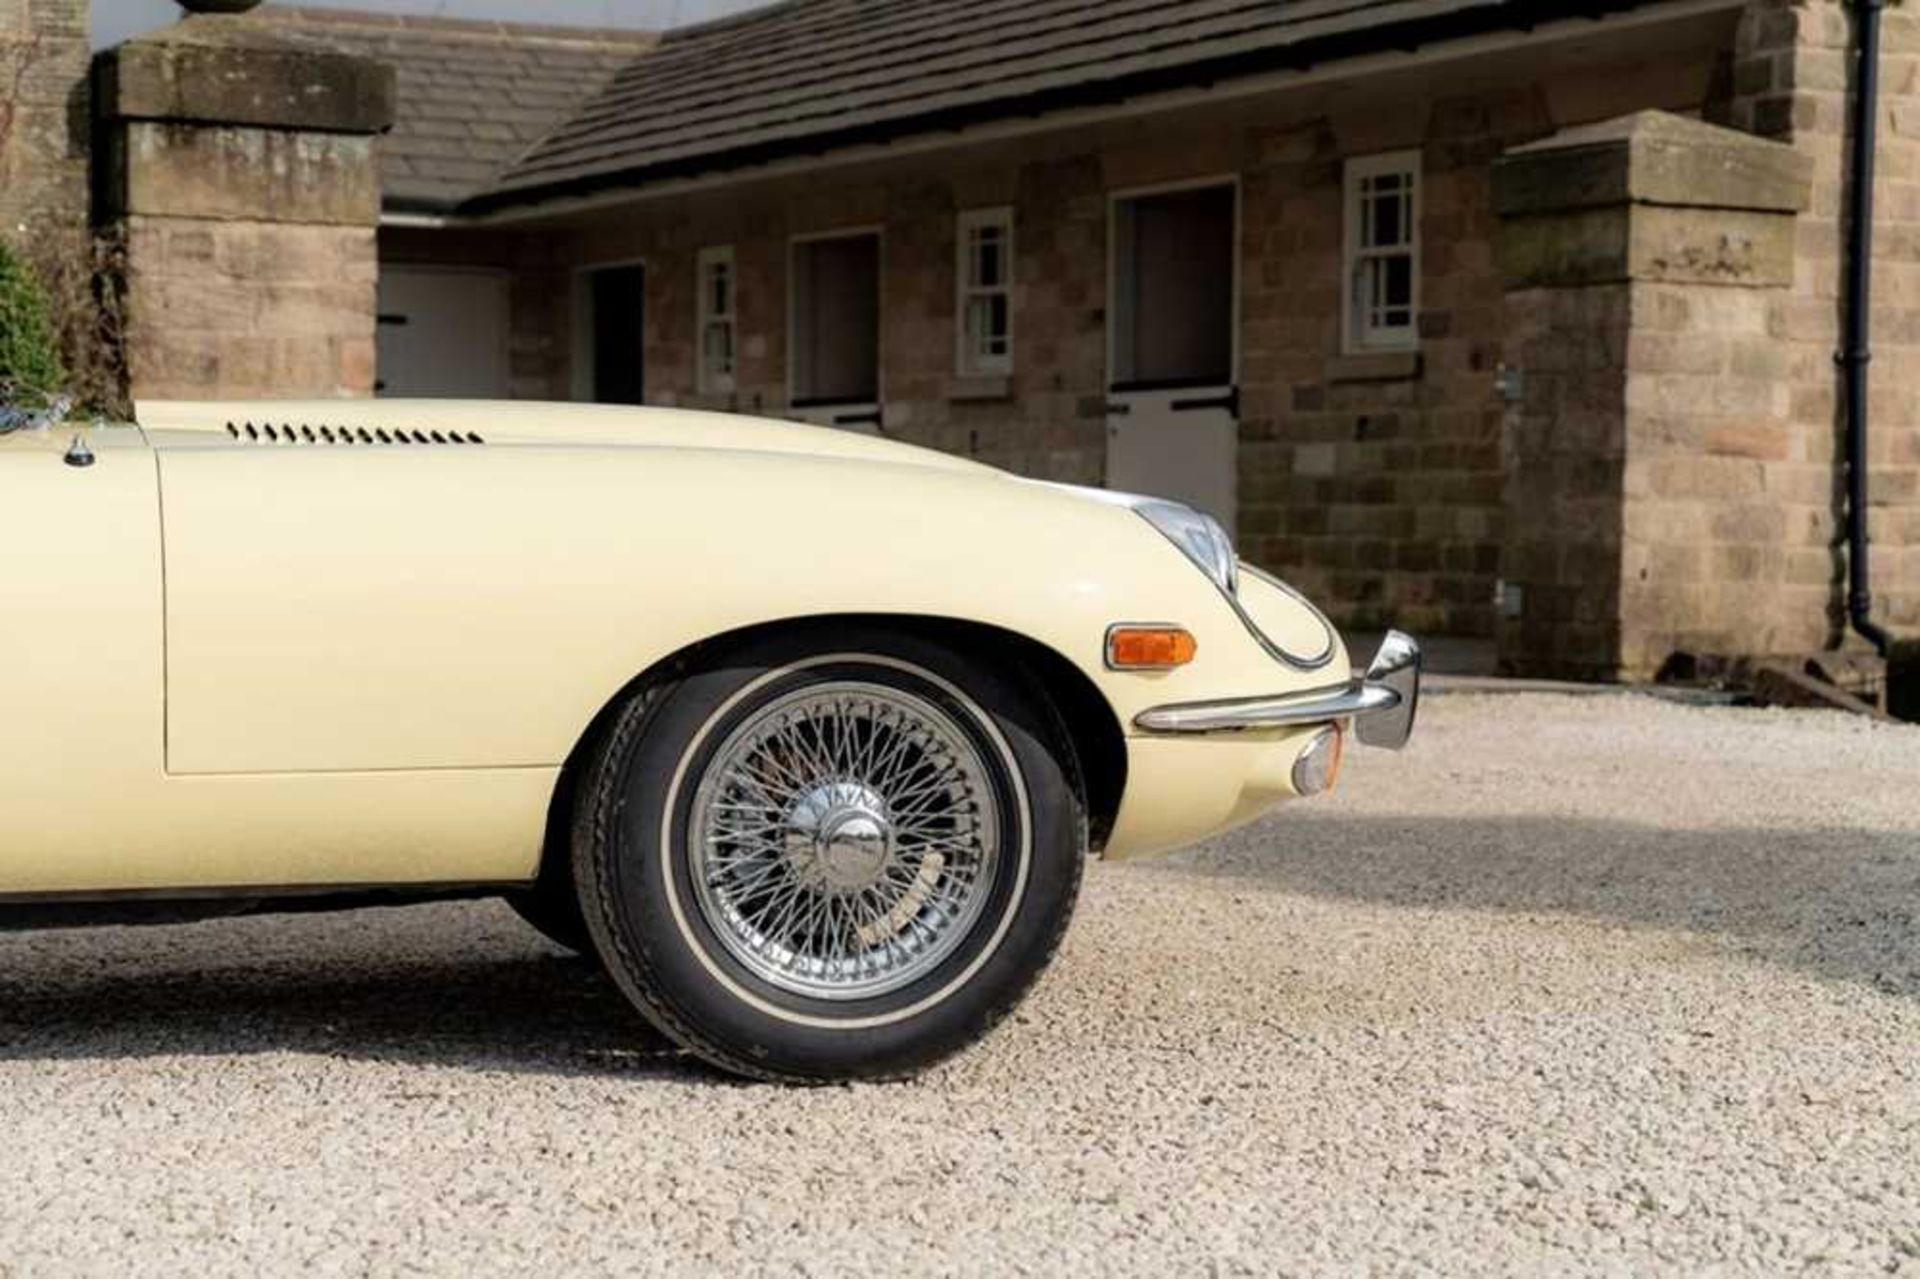 1968 Jaguar E-Type 4.2 Litre Coupe Genuine 44,000 miles from new - Image 12 of 68